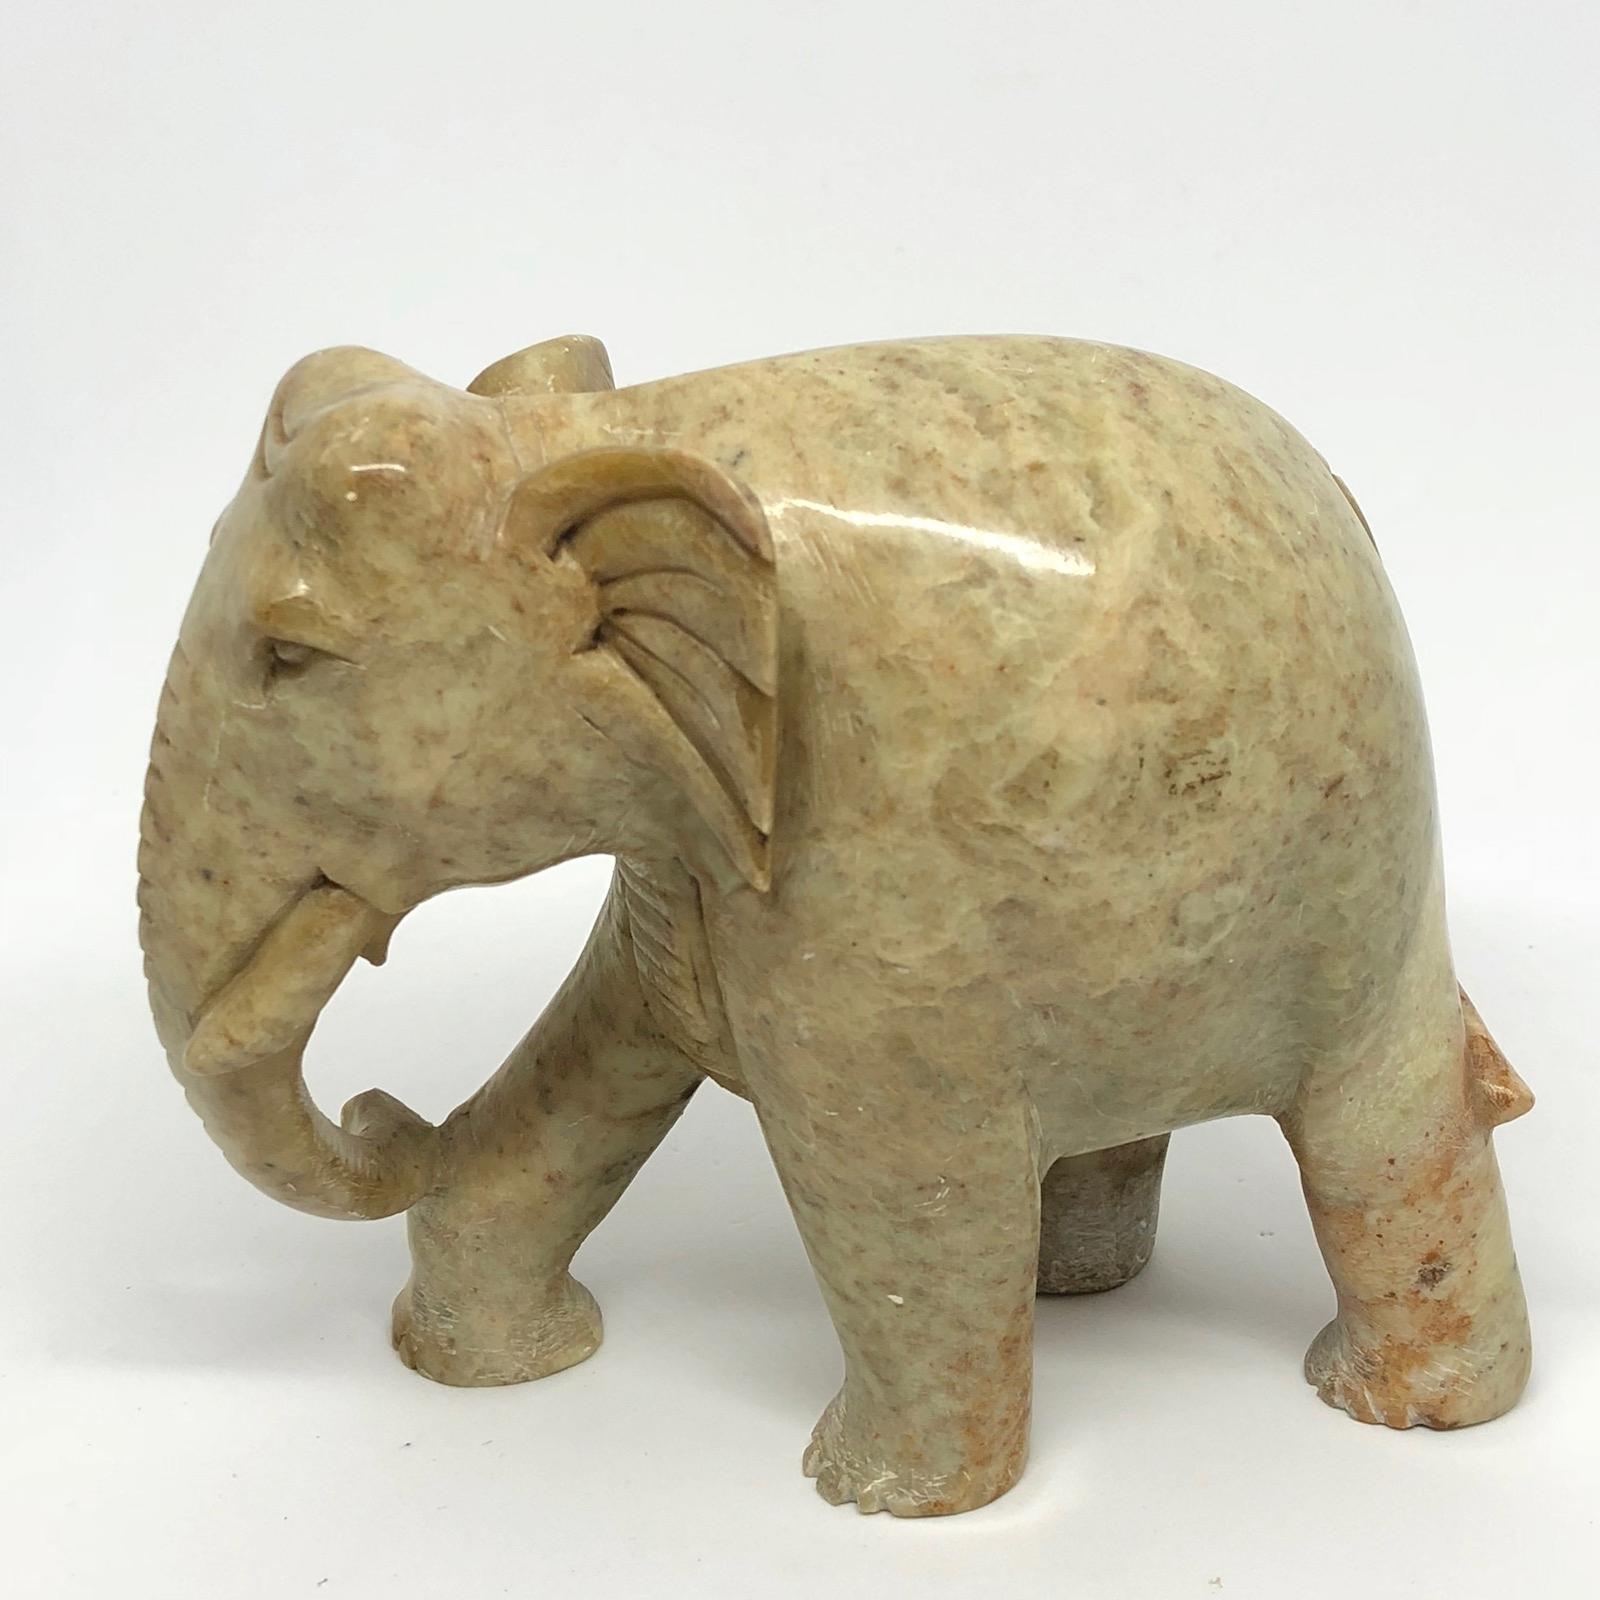 A decorative hand-carved elephant sculpture. Some wear but this is old-age. Made of a heavy stone, think its marble. We think it is from Asia and was made in the 1970s.